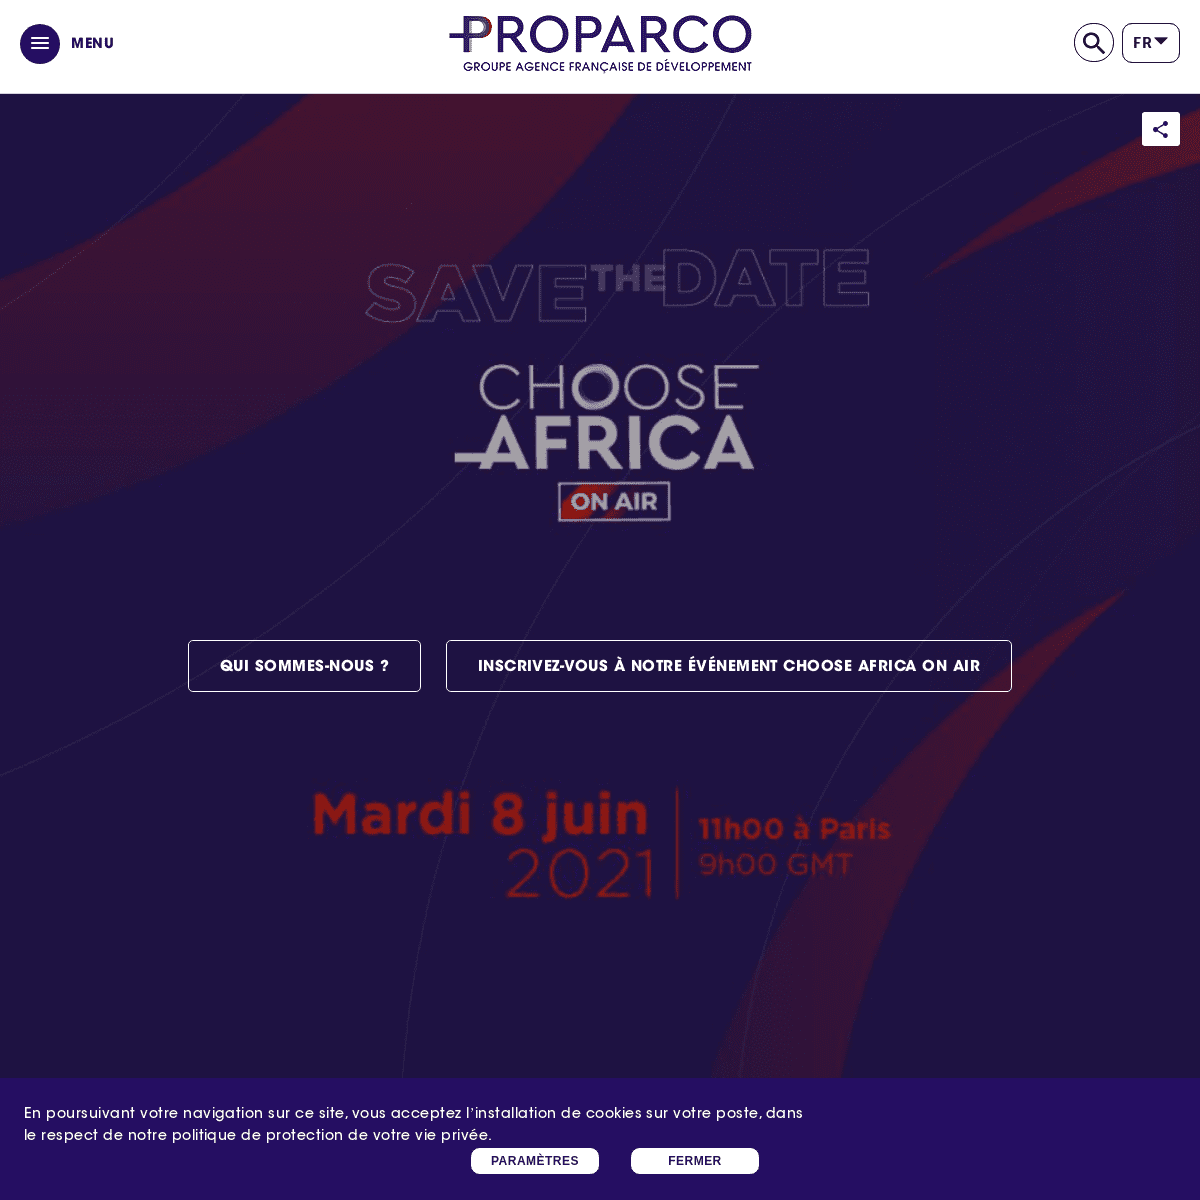 A complete backup of https://proparco.fr